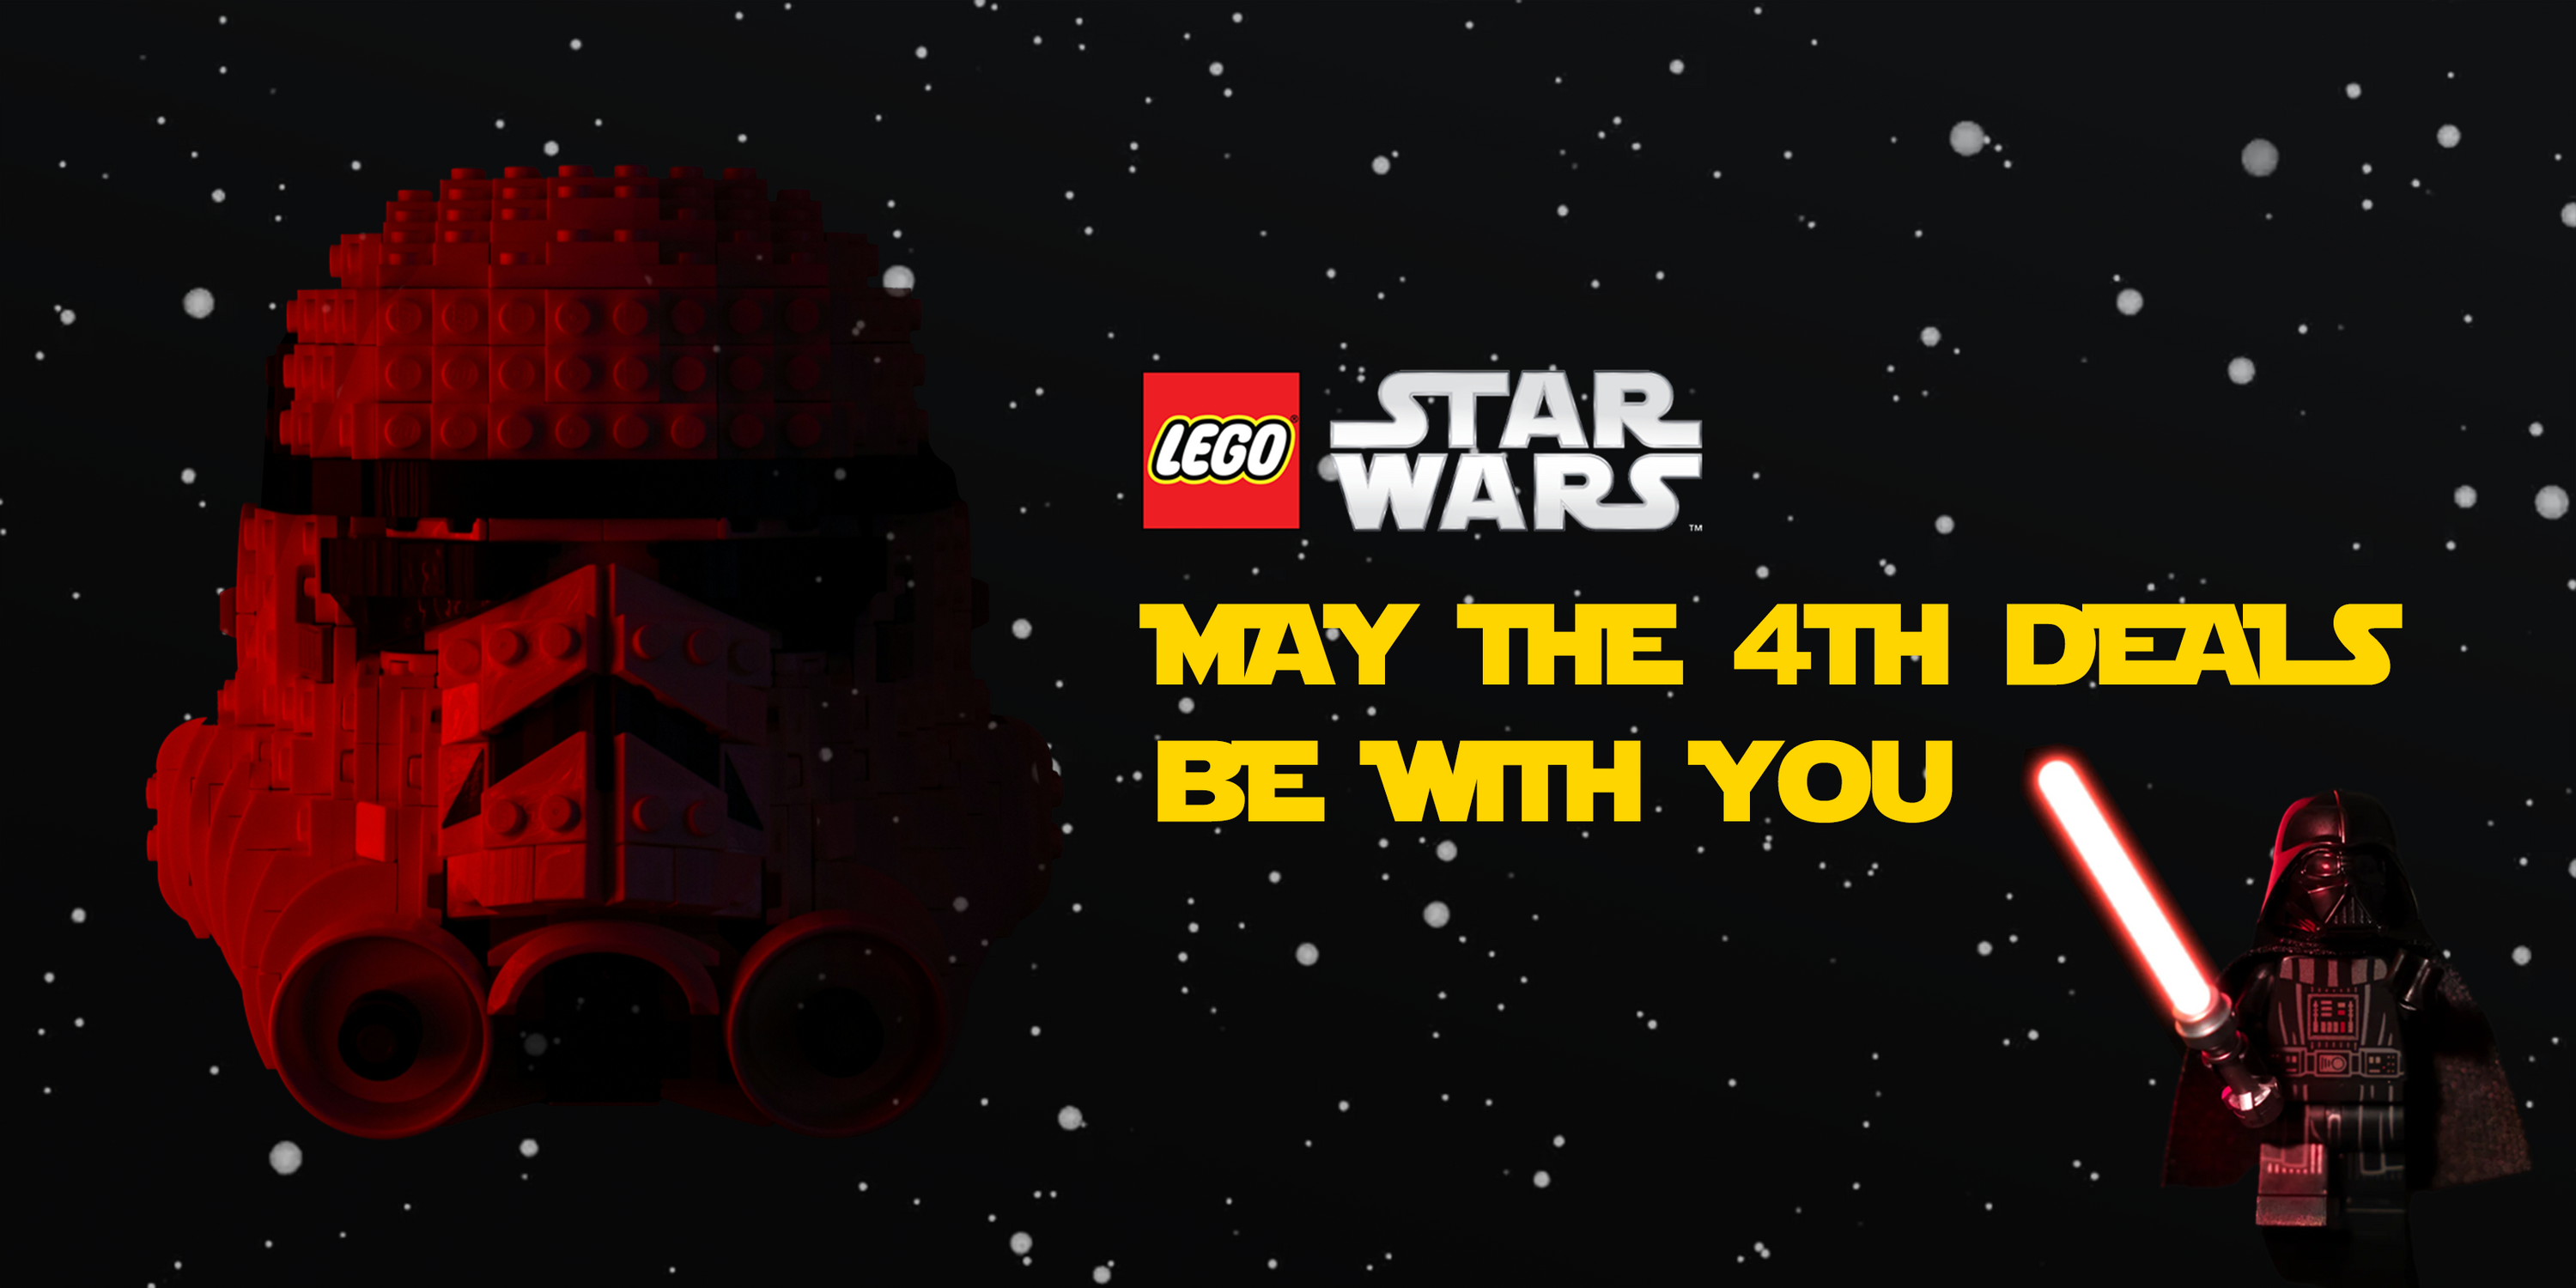 LEGO Star Wars May the 4th Deals